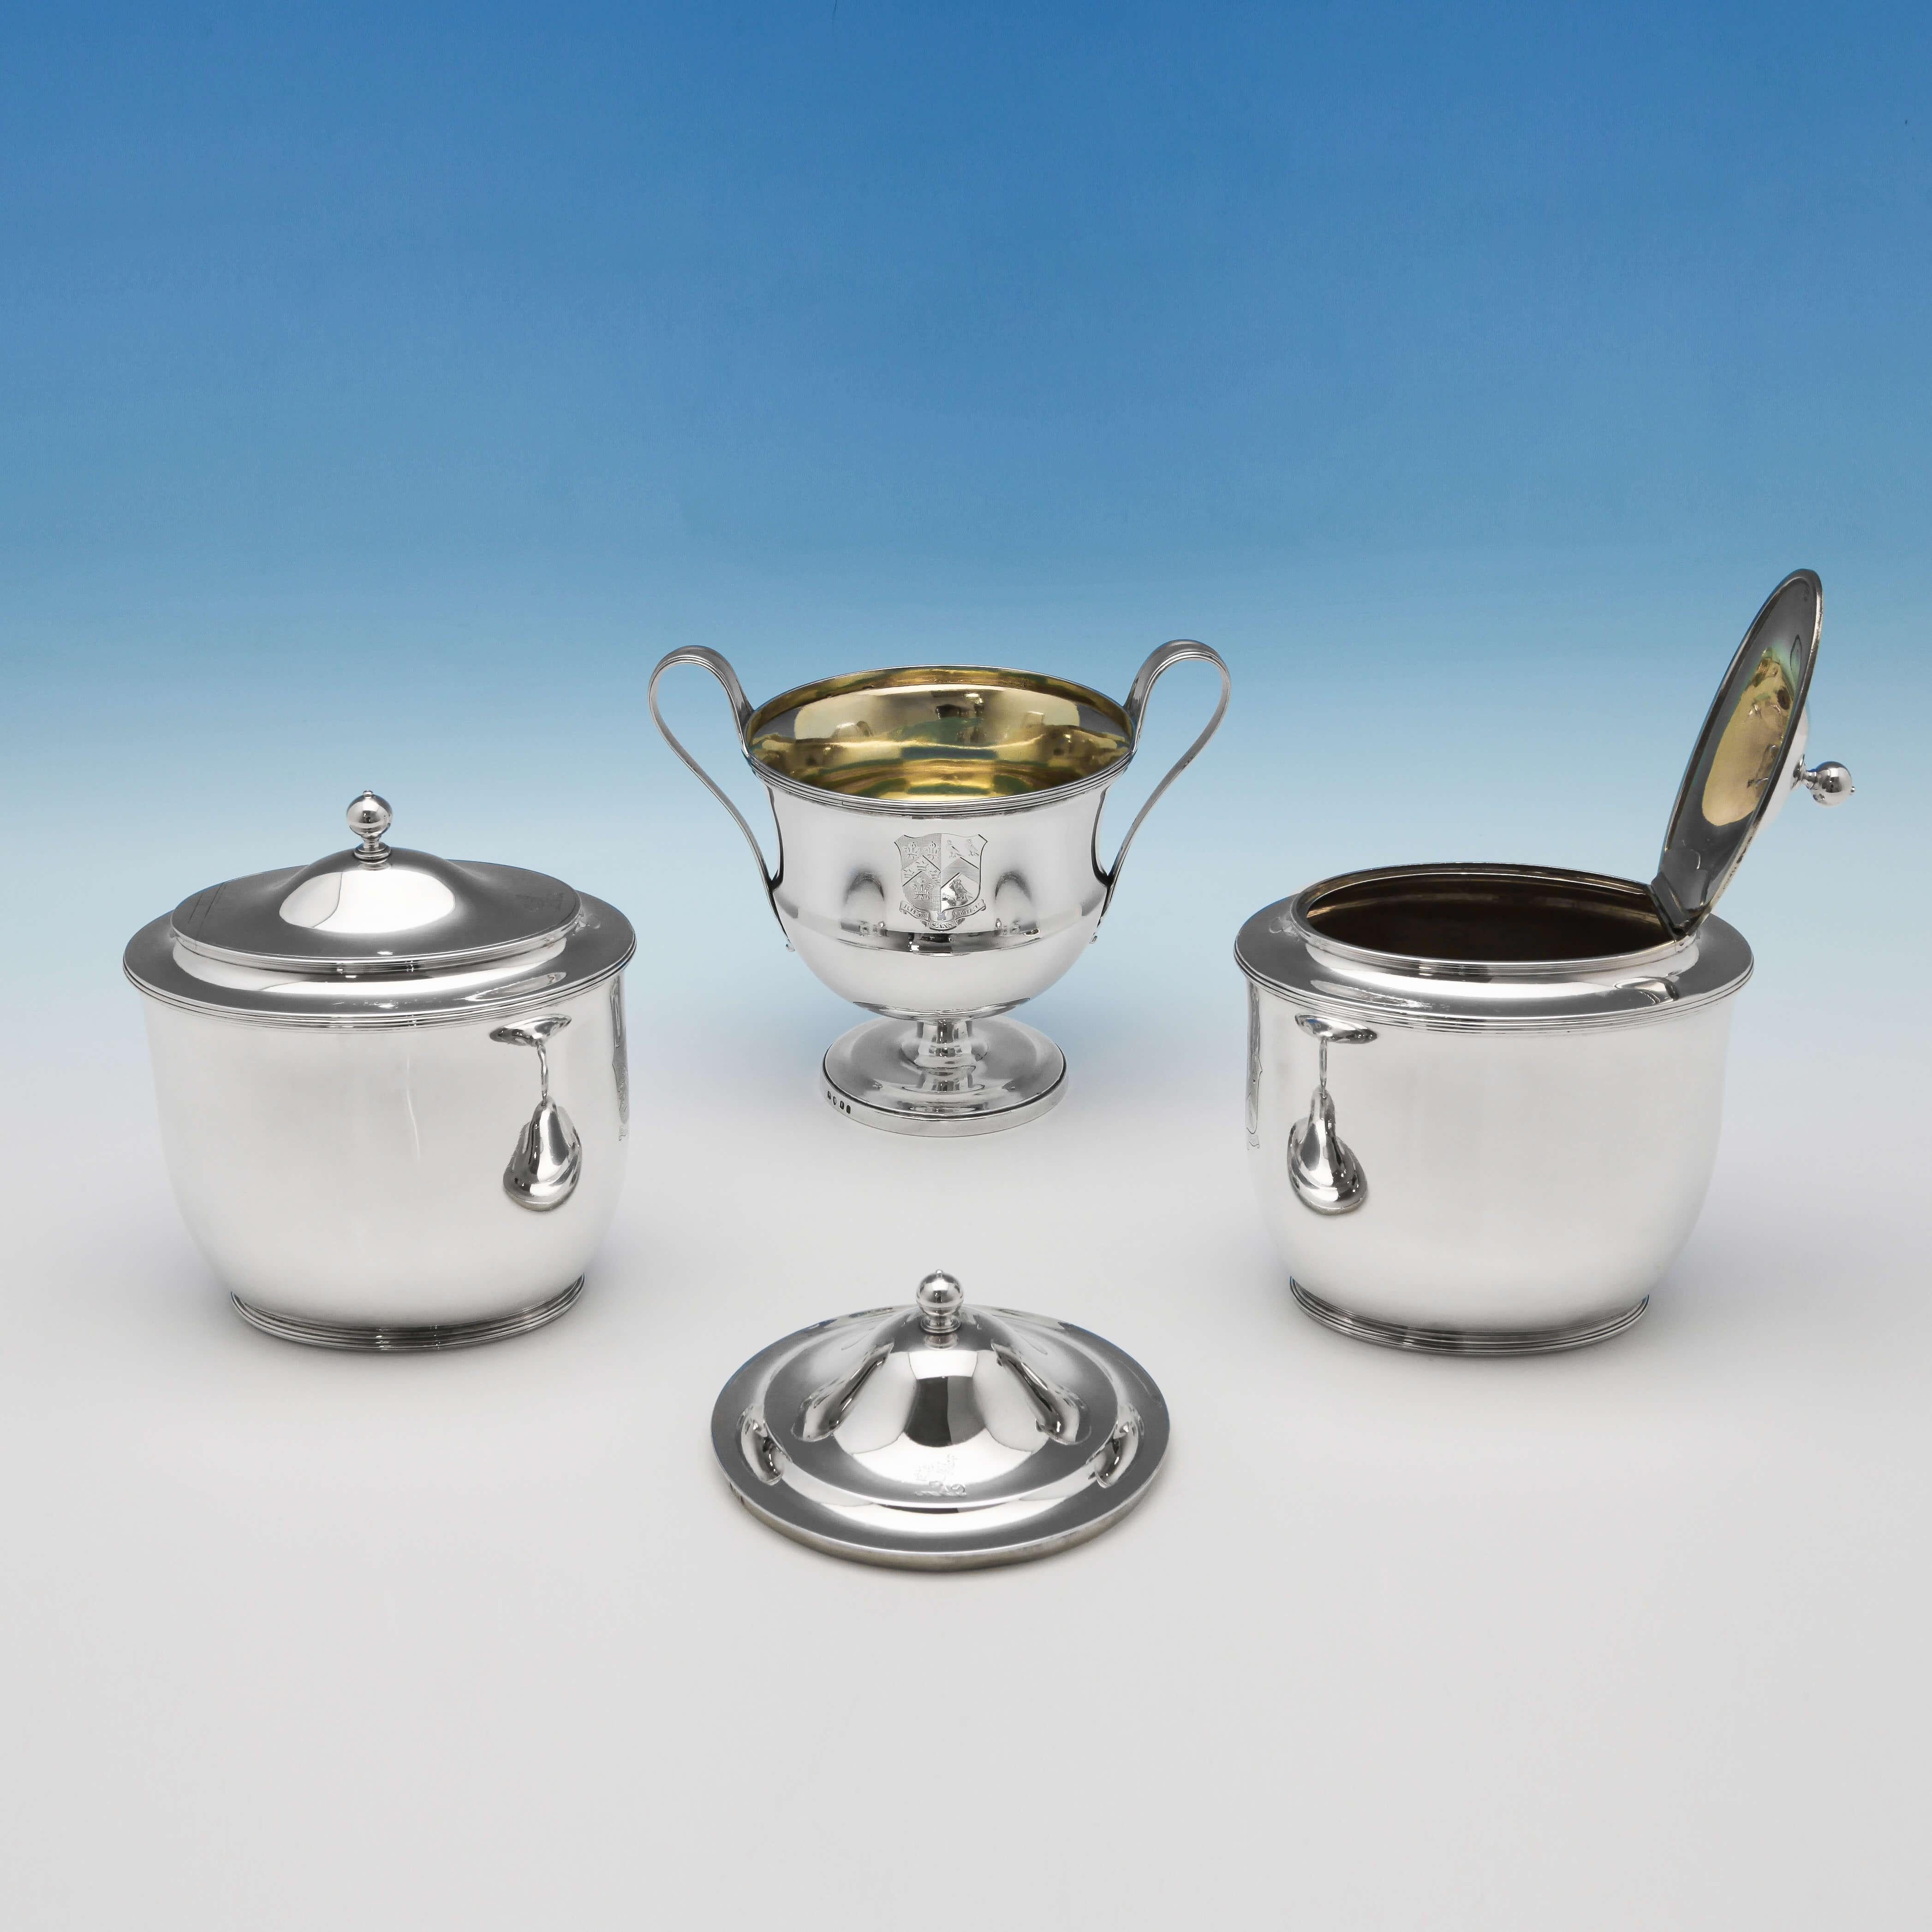 English Neoclassical Antique Sterling Silver Tea Caddy Set from 1797 by Robert Sharp For Sale